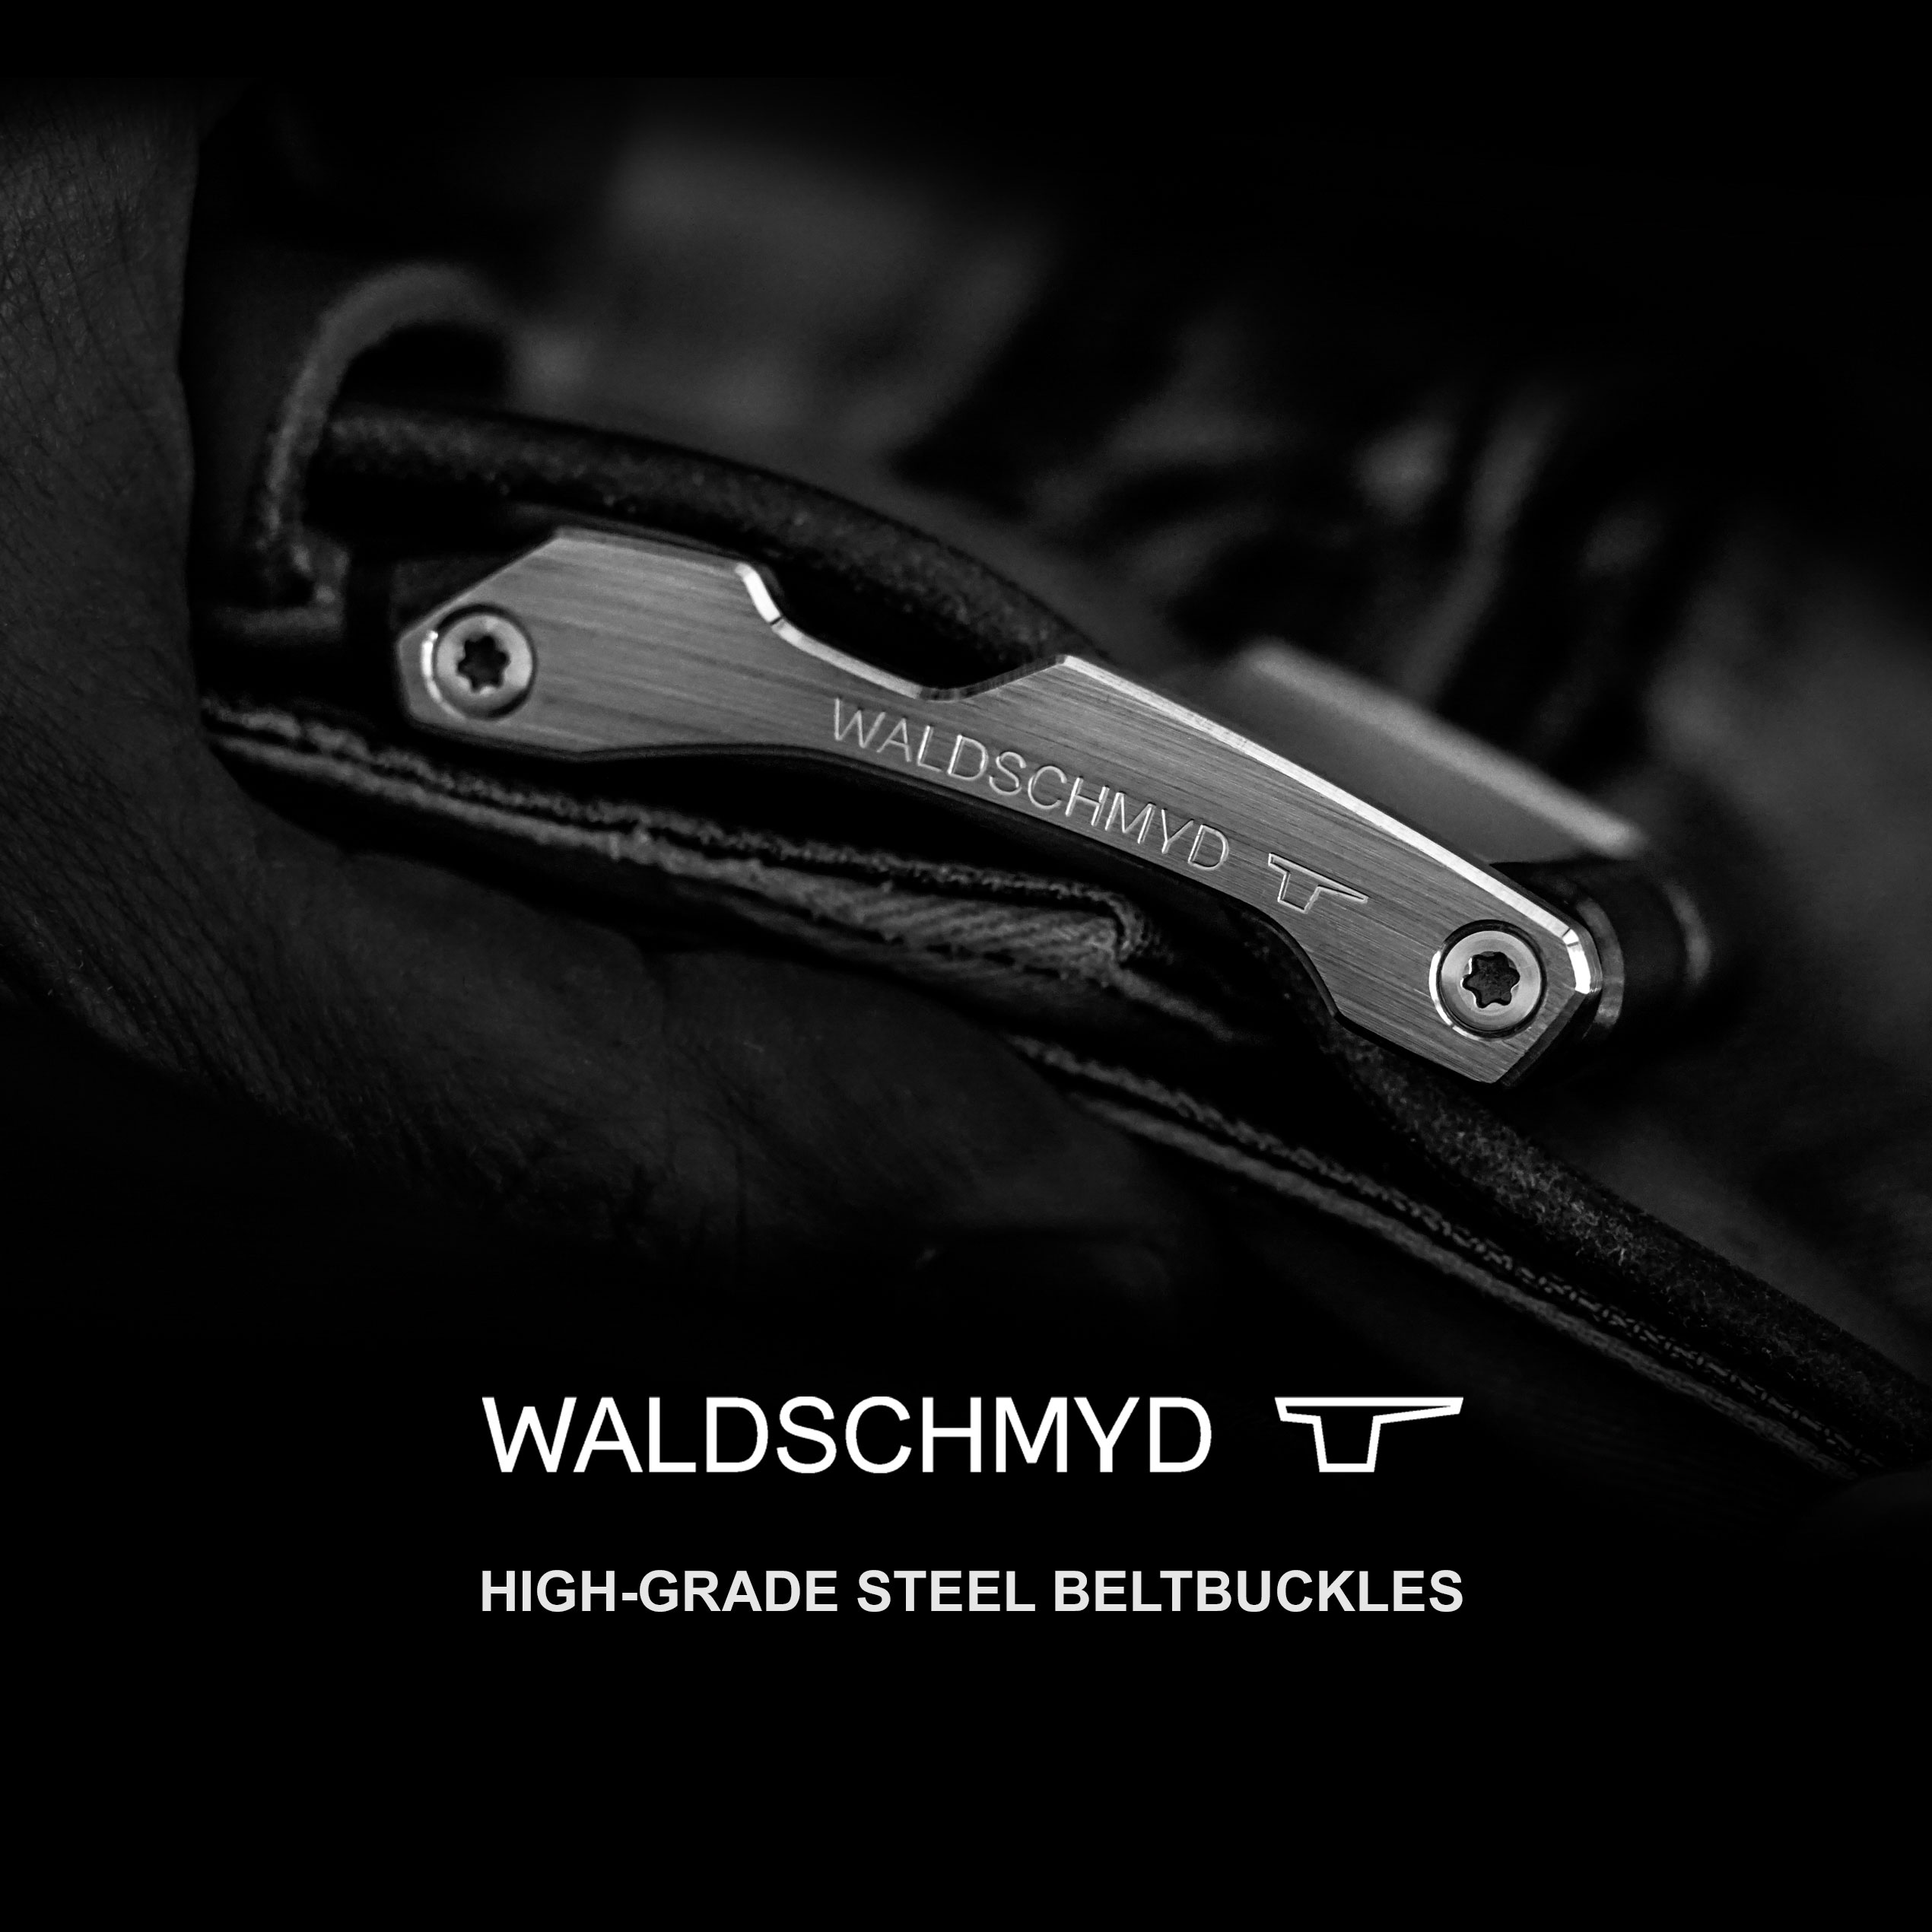 WALDSCHMYD----GENTLEMAN-ROADSTER-PMK17---41MM-STAINLESS-STEEL-ROLLER-BUCKLE---SATINAGE-FINISH---PREMIUM-QUALITY---CNC-MILLED-PARTS---TIMELESS---MECHANIC-LOVERS